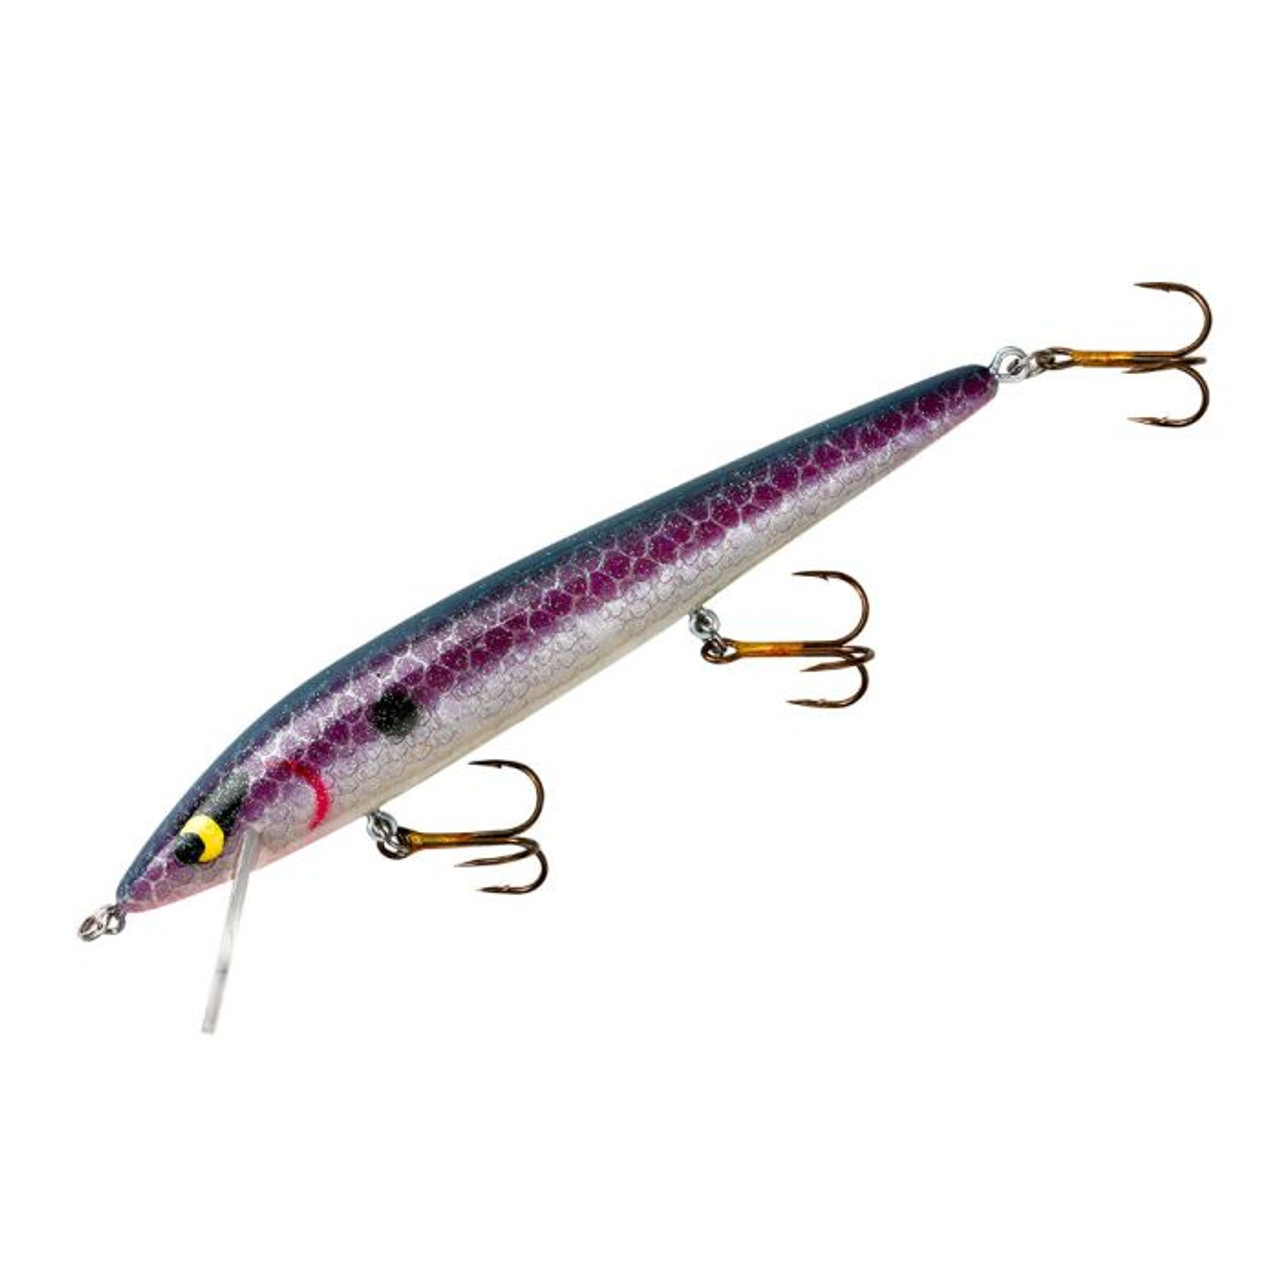 Smithwick Lures Suspending Super Rogue Fishing Lure 